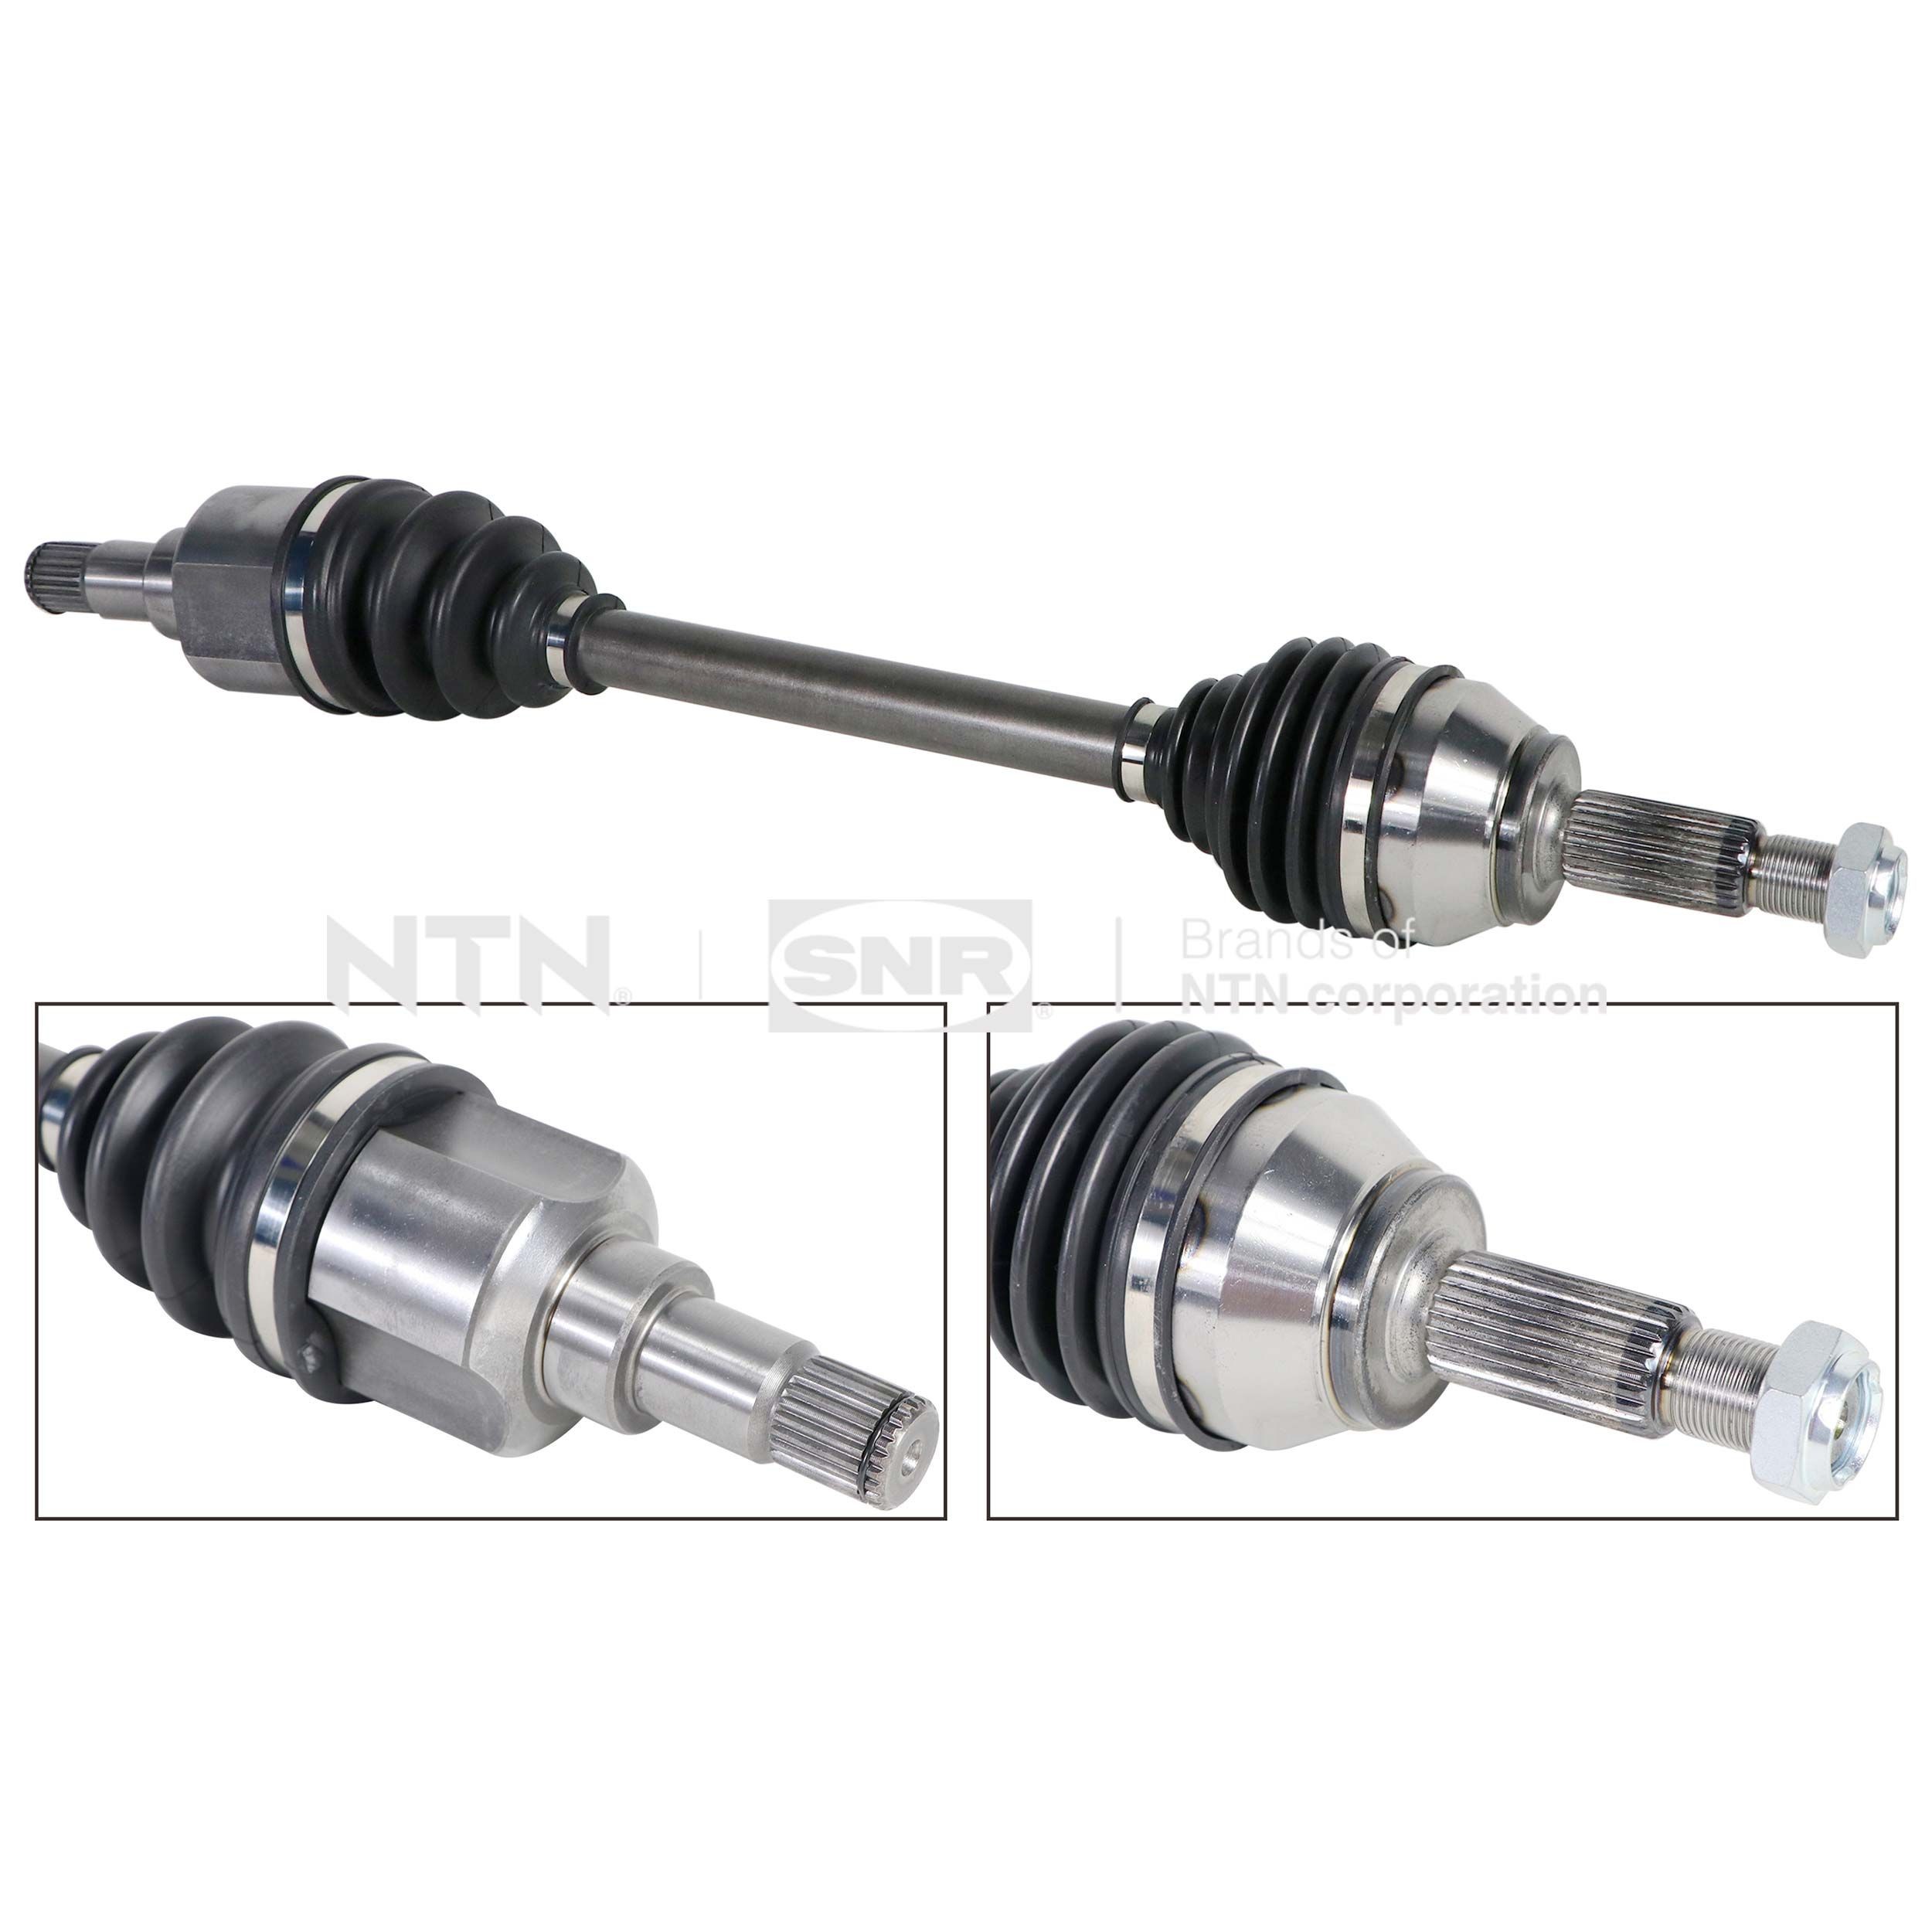 Great value for money - SNR Drive shaft DK52.014